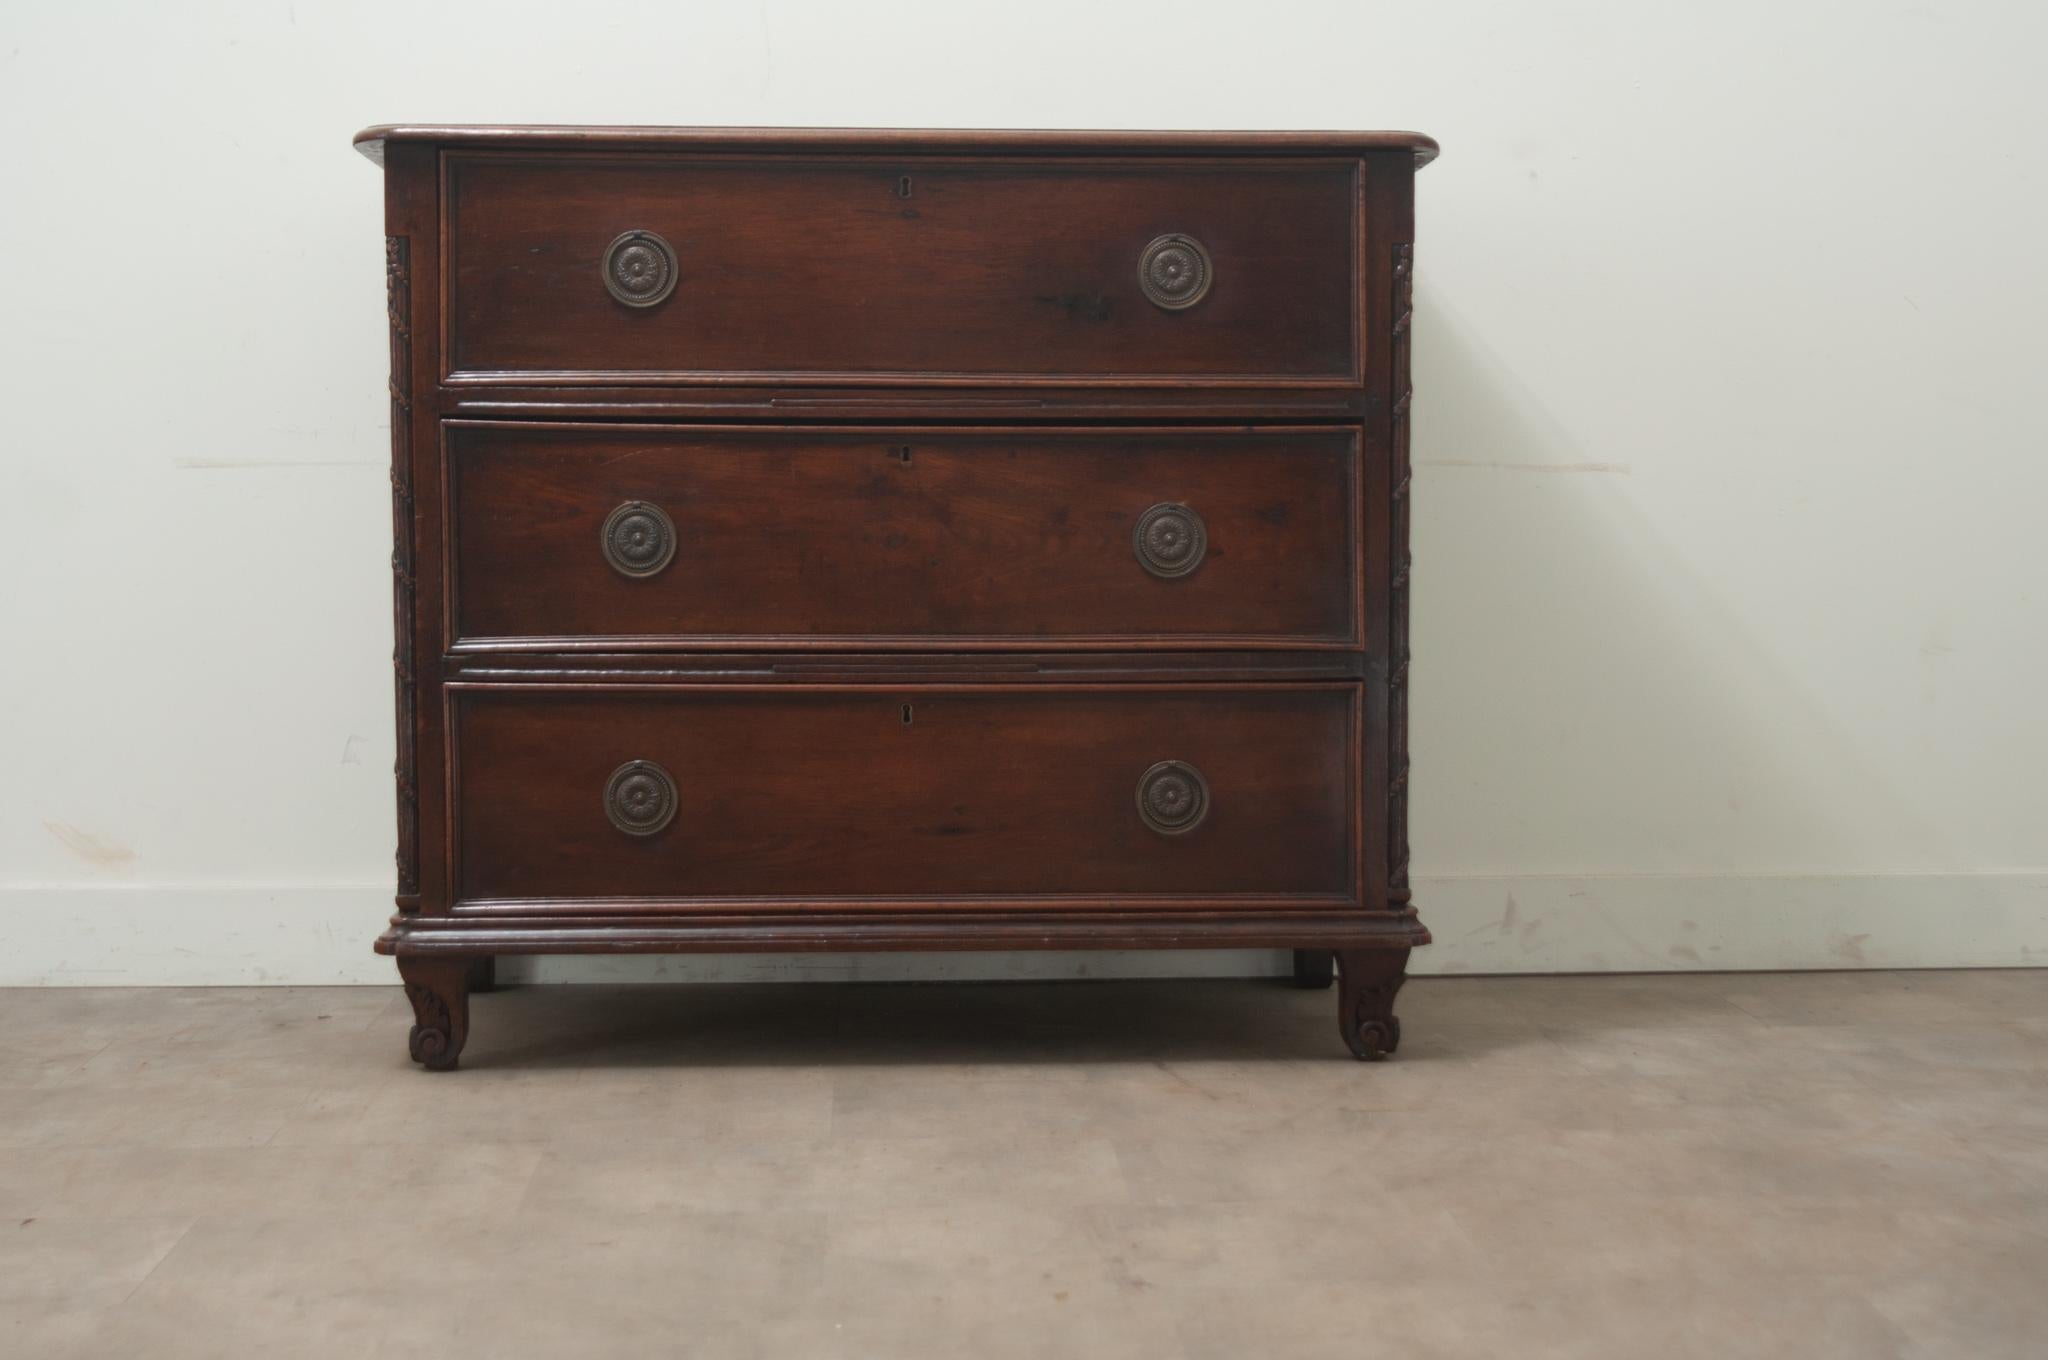 A massive solid oak chest of drawers from the early 1800’s. This large chest has three easy-to-use drawers with patinated brass ring pulls. The front corners are carved from the top all the way down to the cabriole legs. The sides are made of reeded